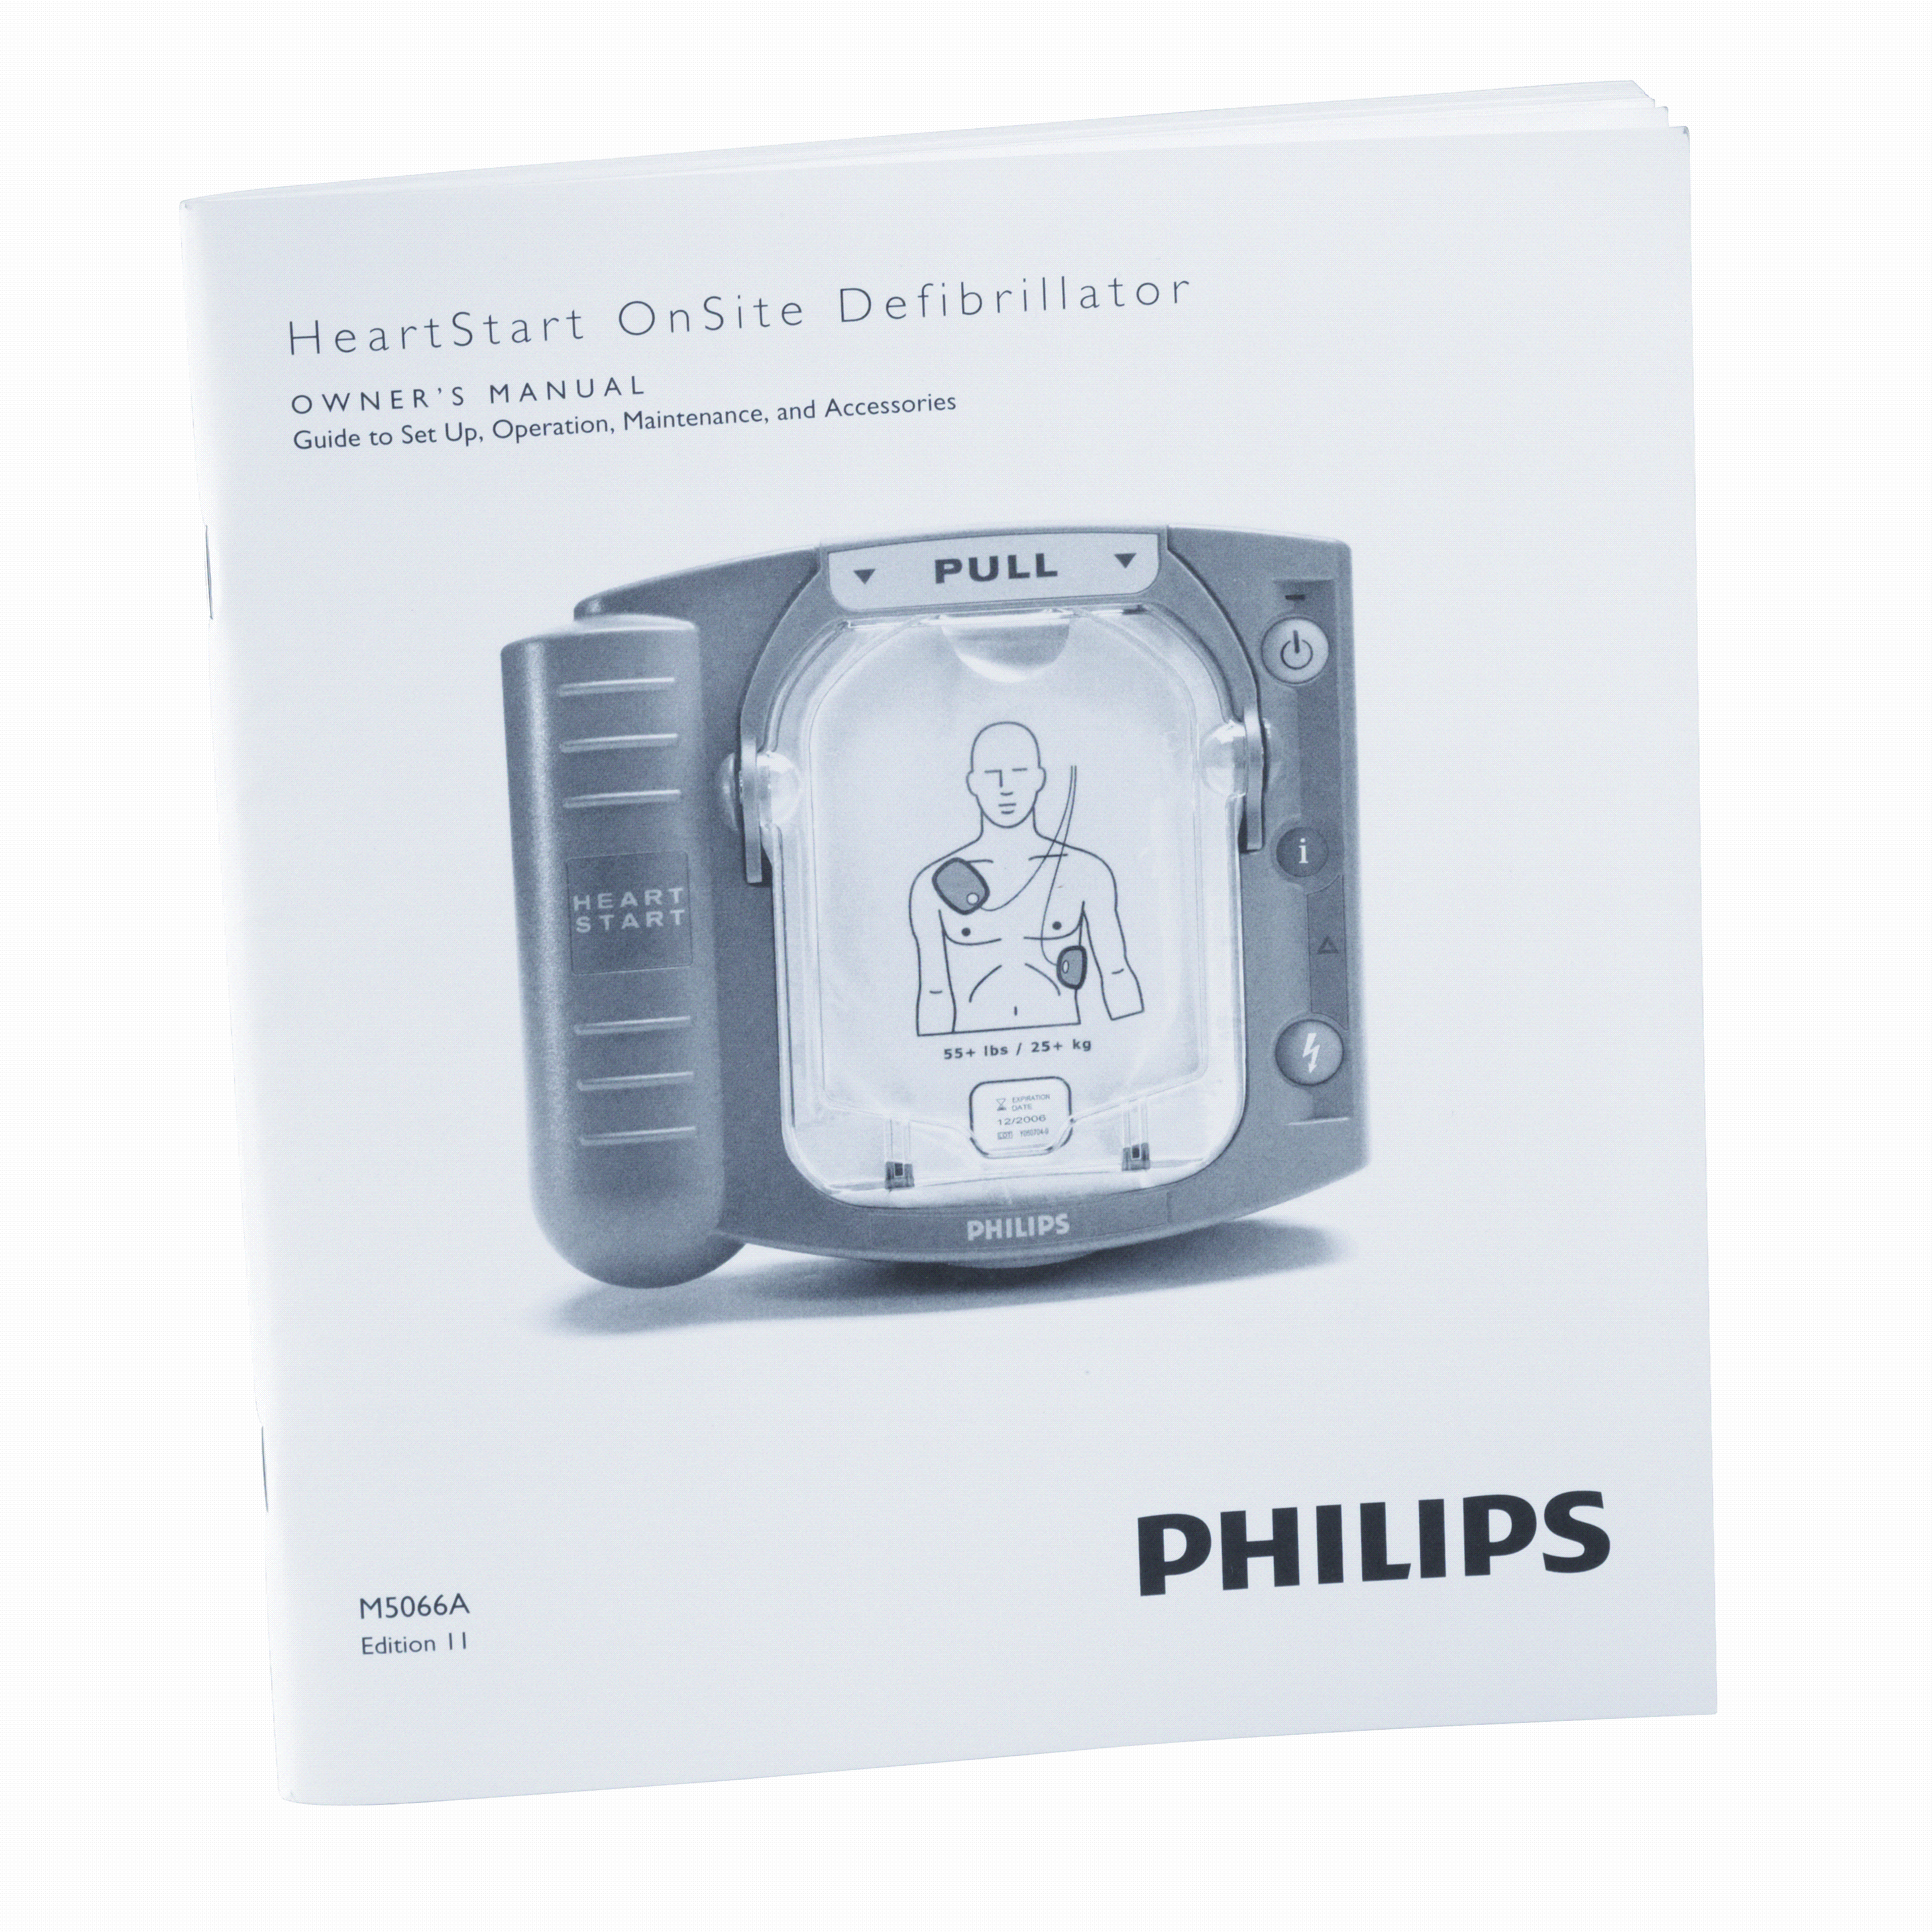 Philips Onsite AED image